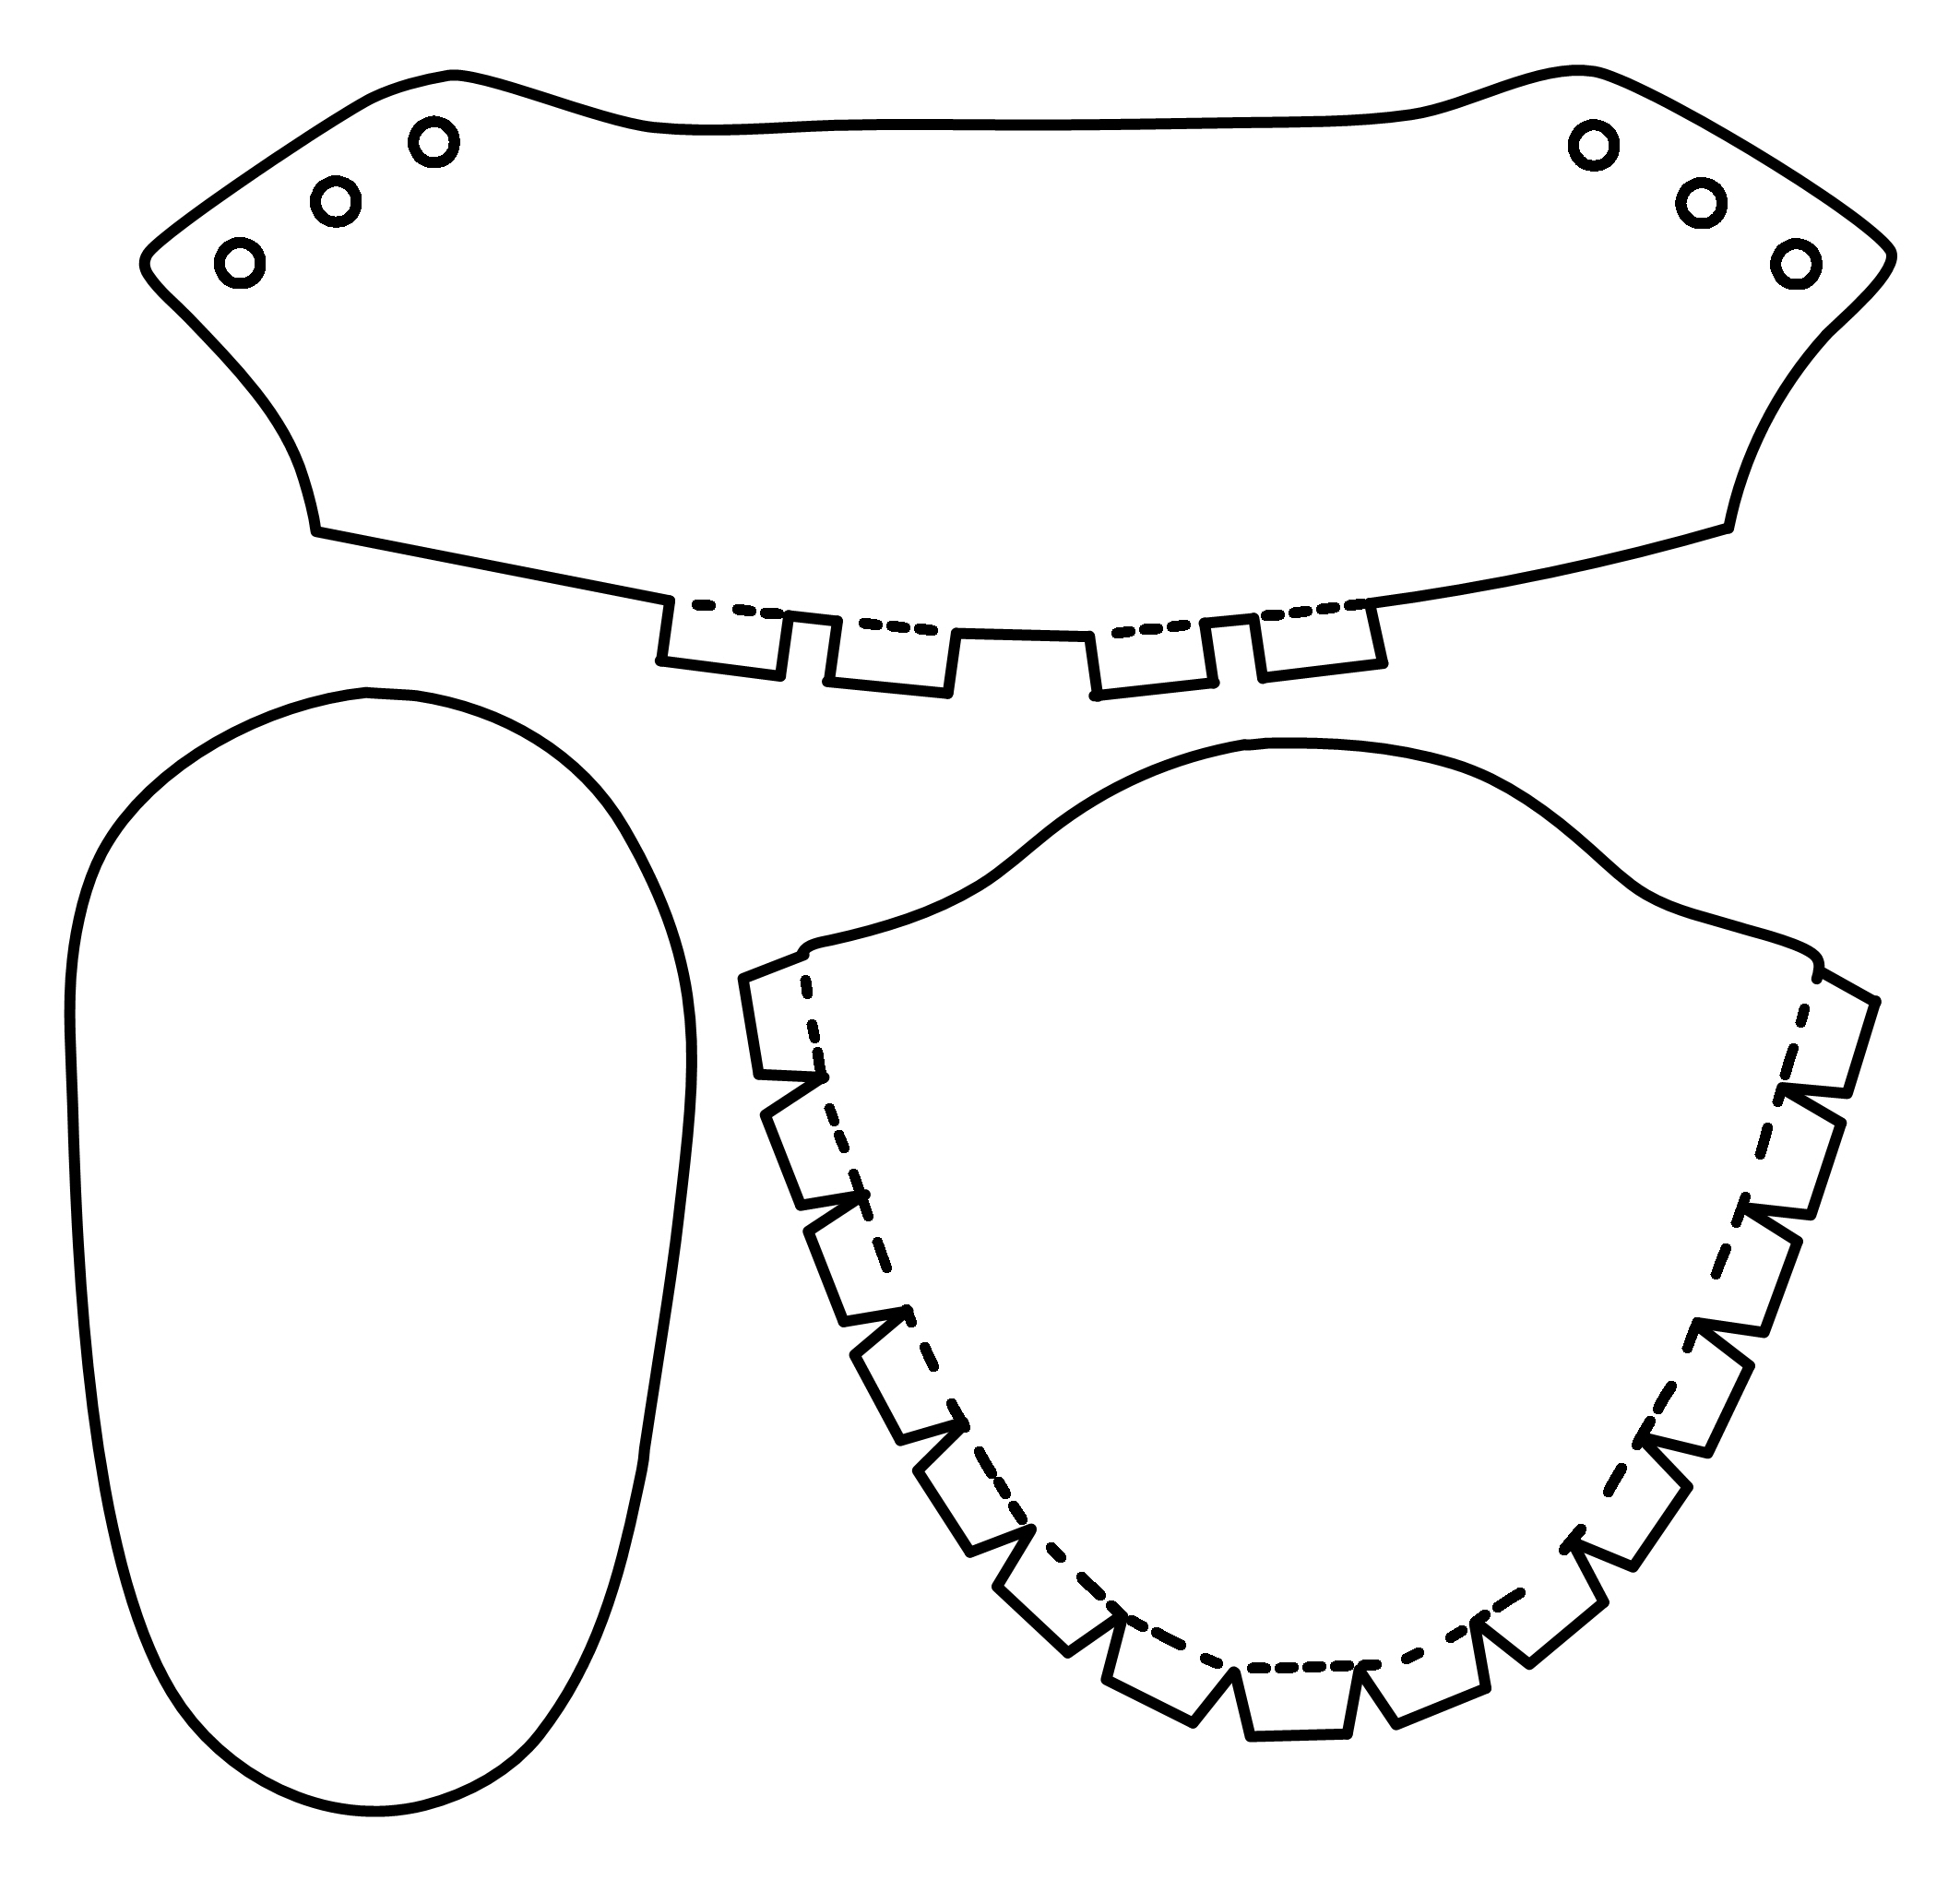 Paper Doll Shoe Template